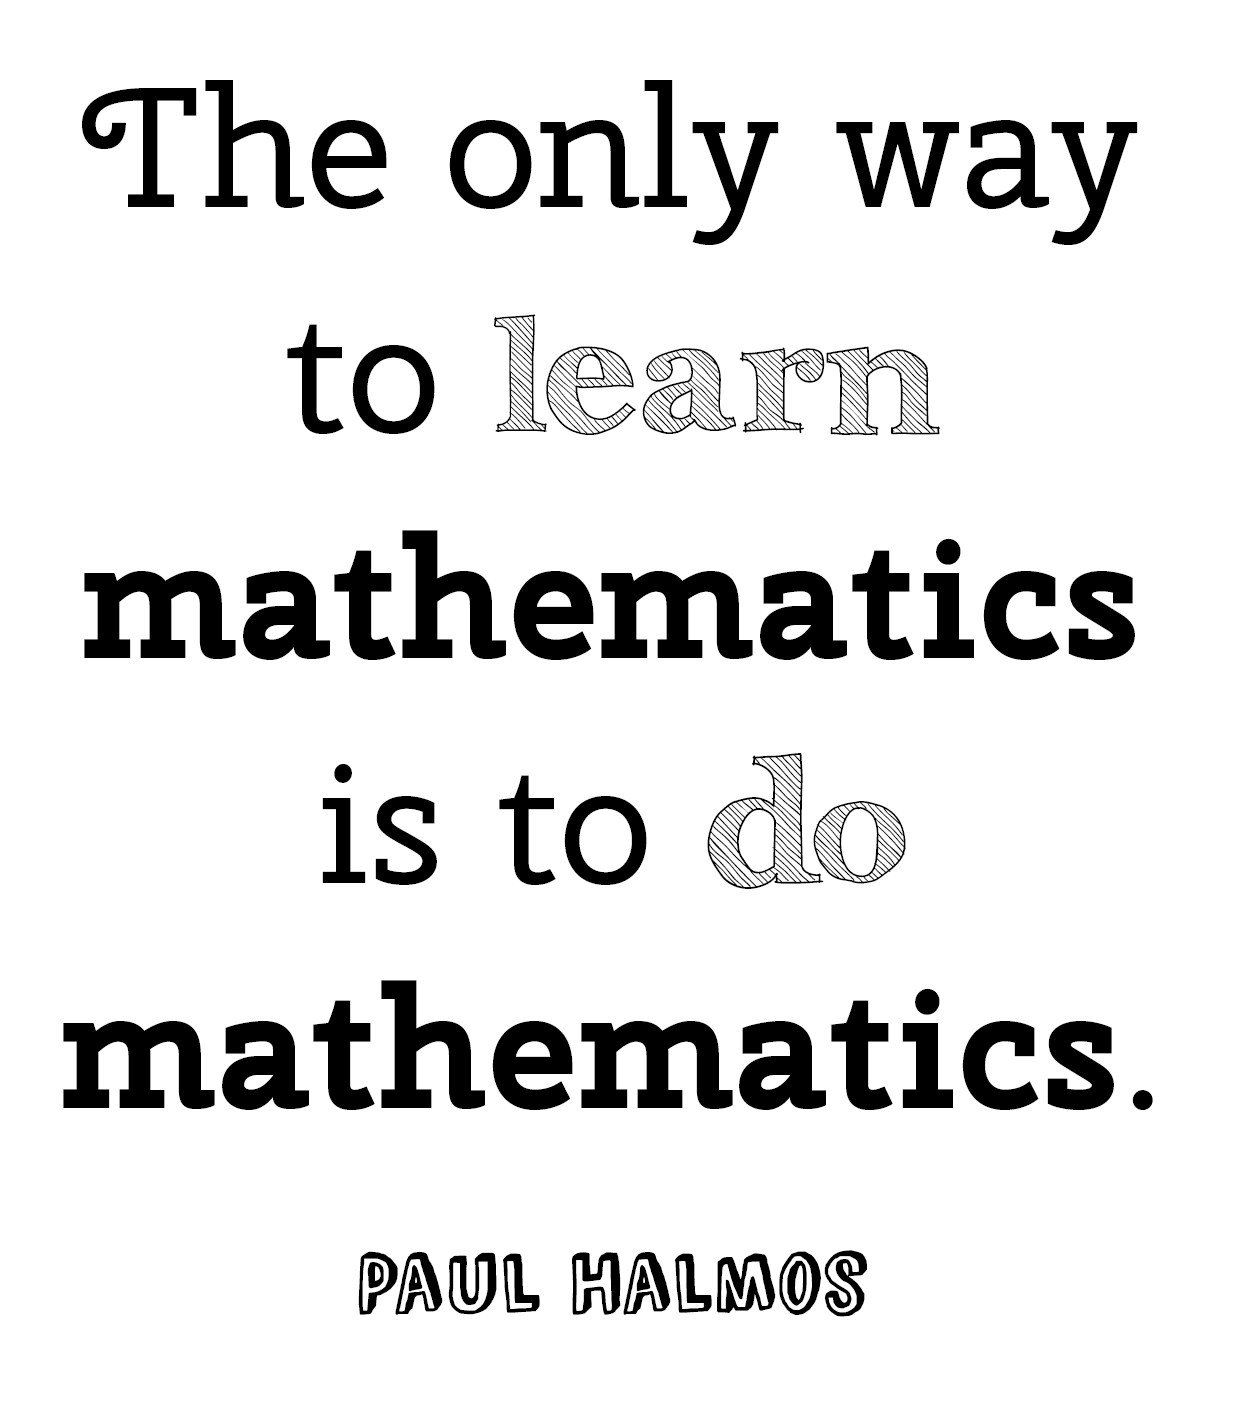 Math Quote Poster - The only way to learn mathematics is to do mathematics.  Paul Halmos